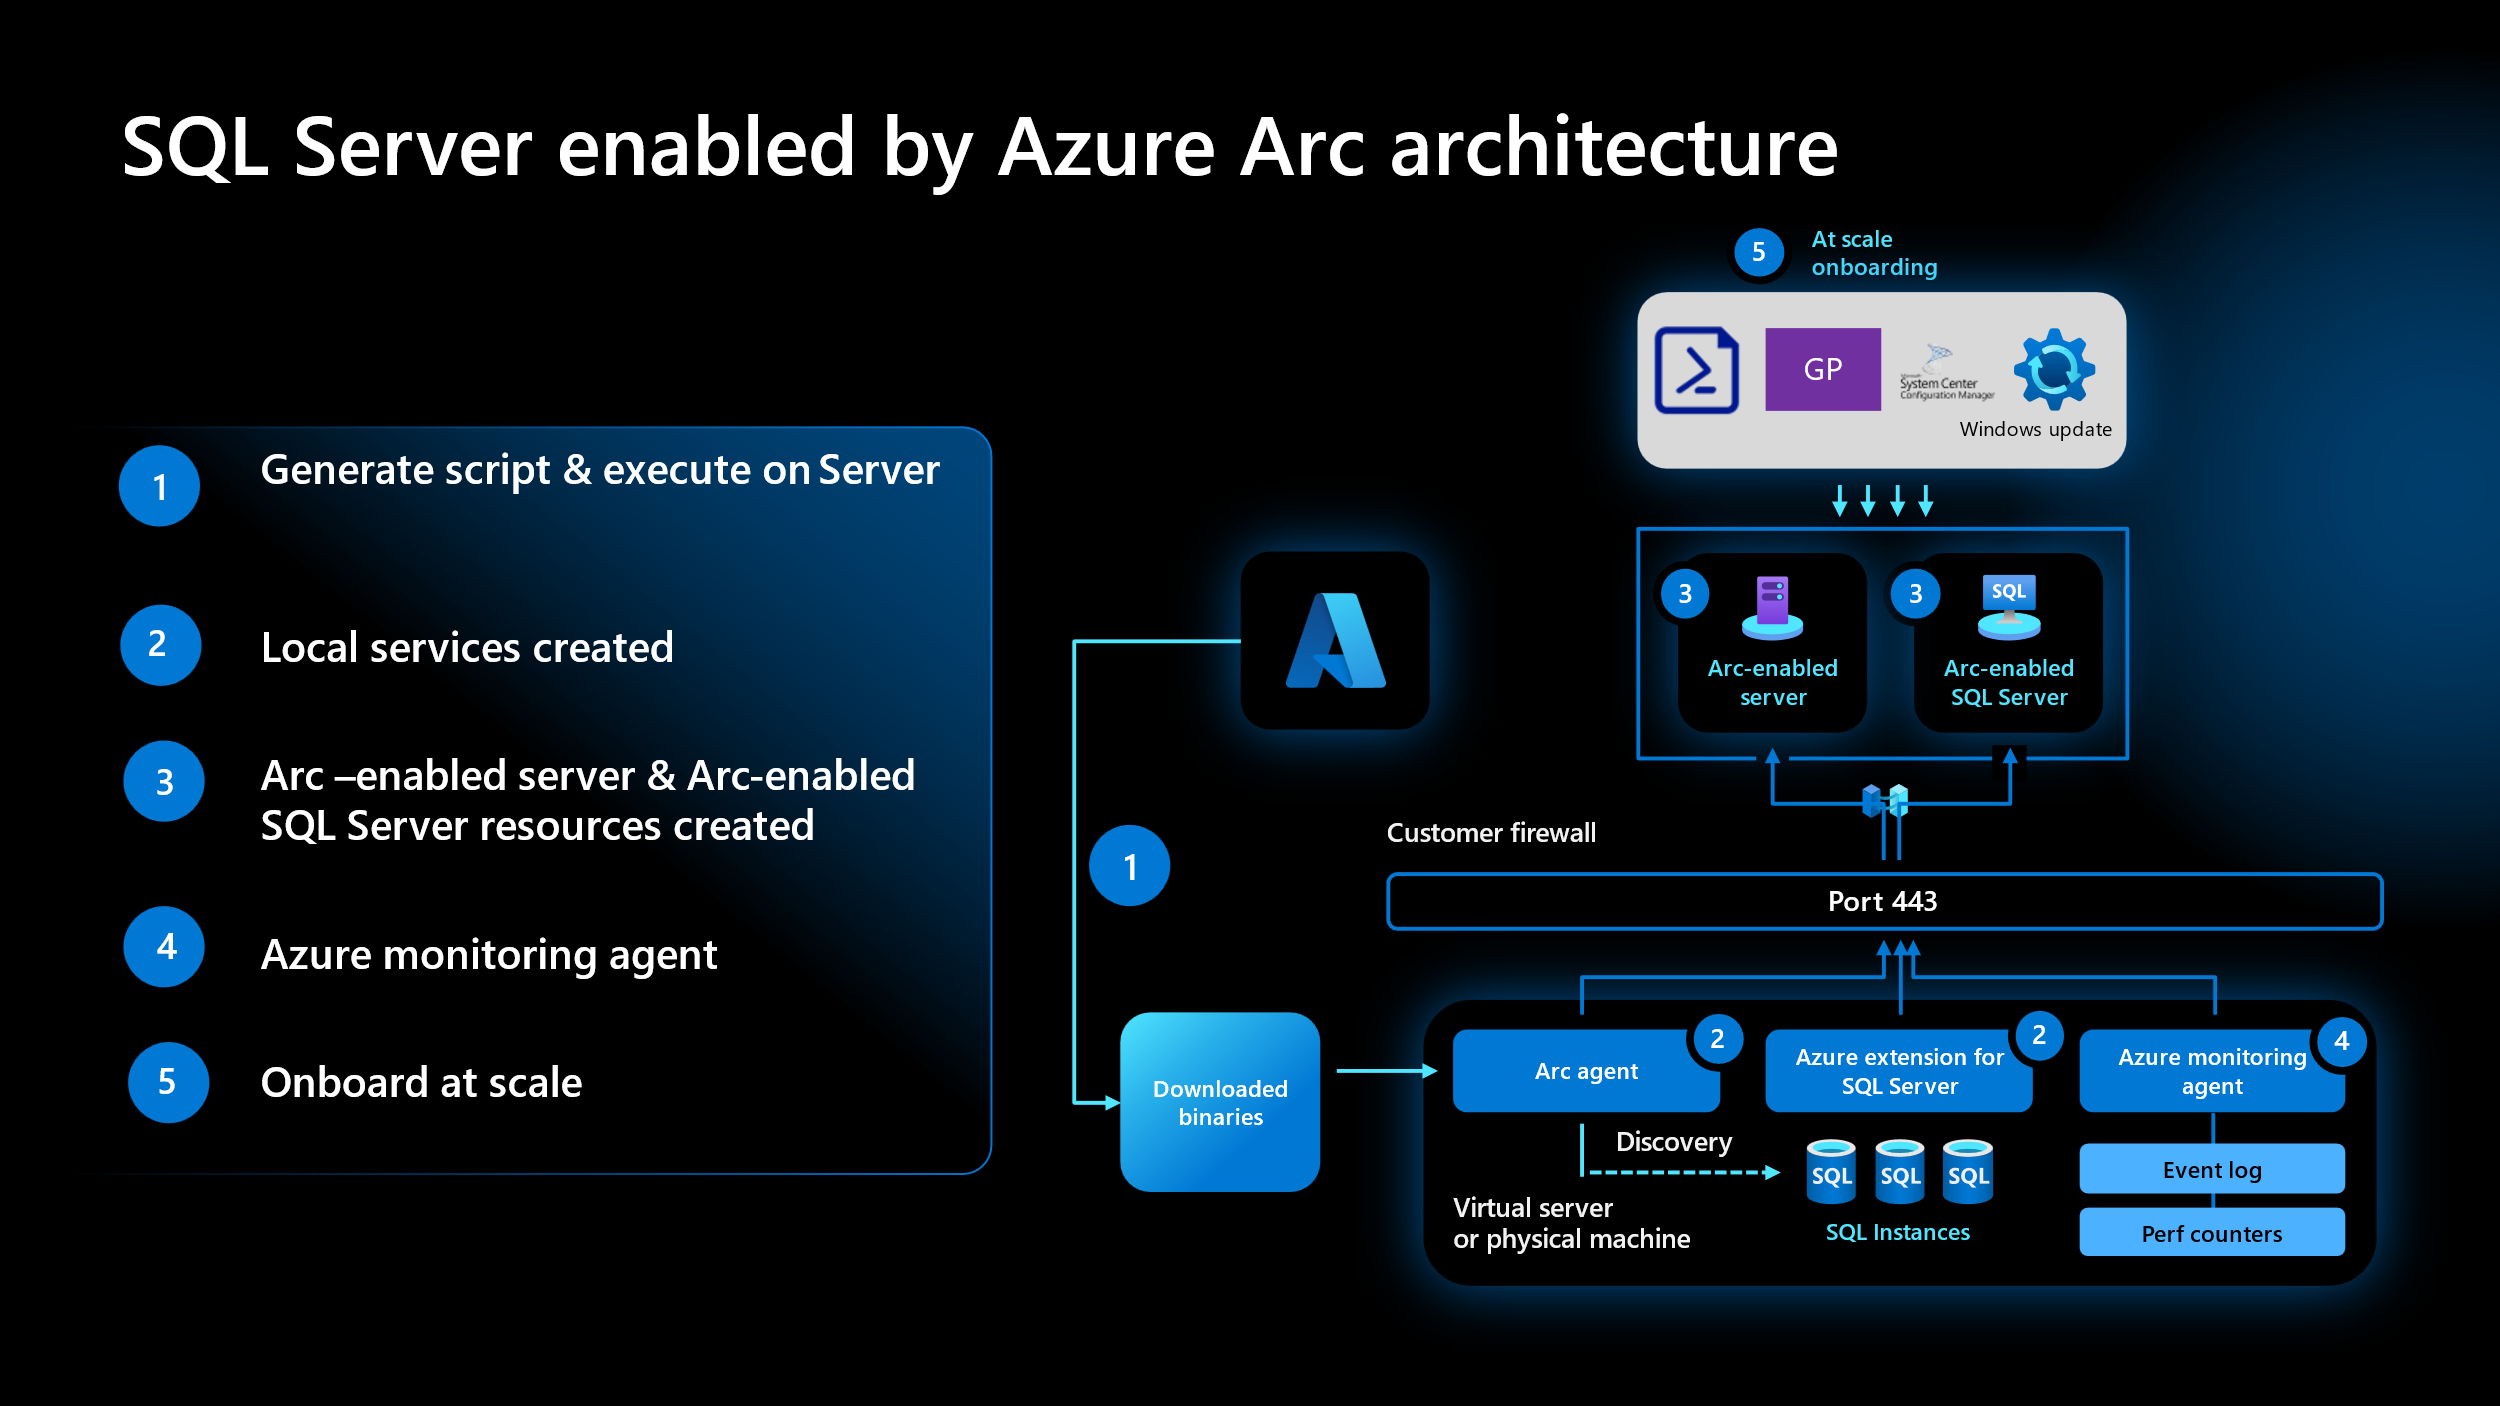 Diagram of the architecture for Azure Arc-enabled SQL Server.